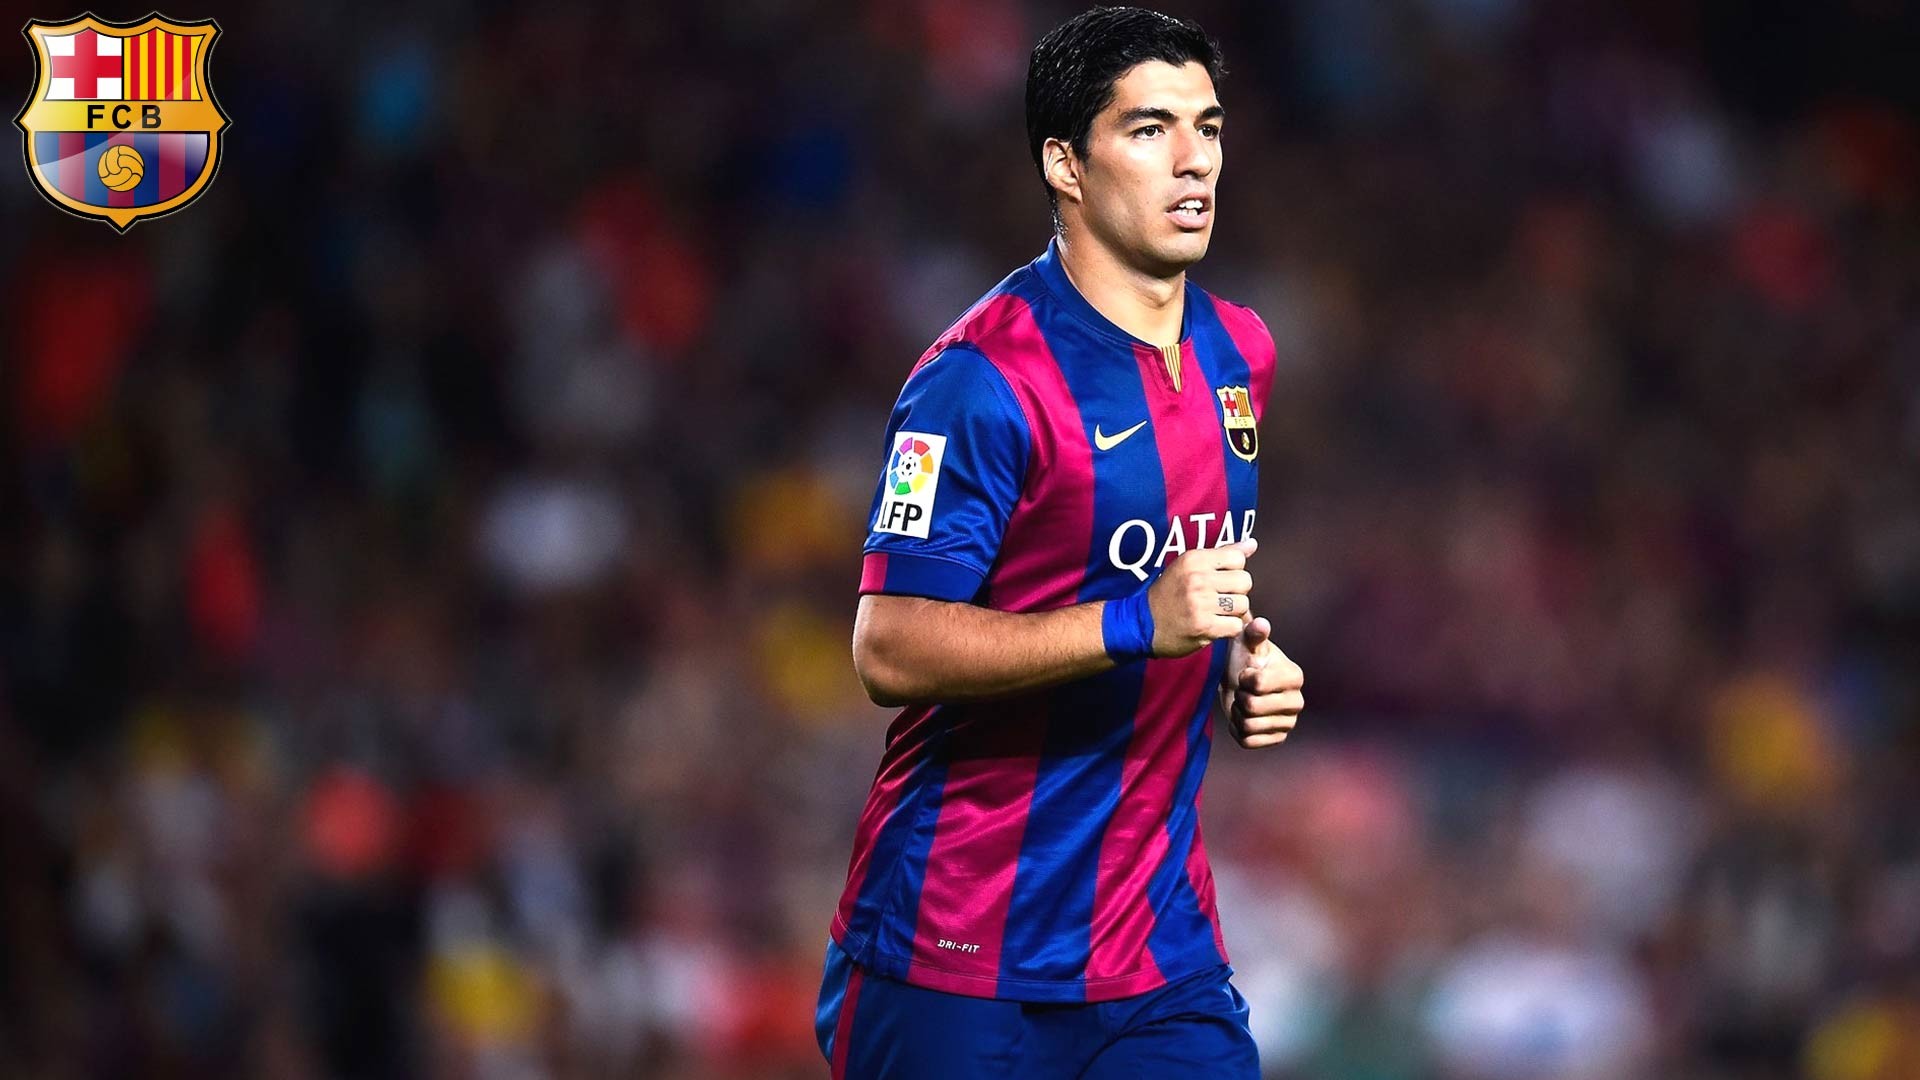 Luis Suarez, FC Barcelona – Full HD Wallpaper. ImgPrix.com – High Definition Wallpapers and Covers Sports HD Wallpapers Pinterest FC Barcelona,